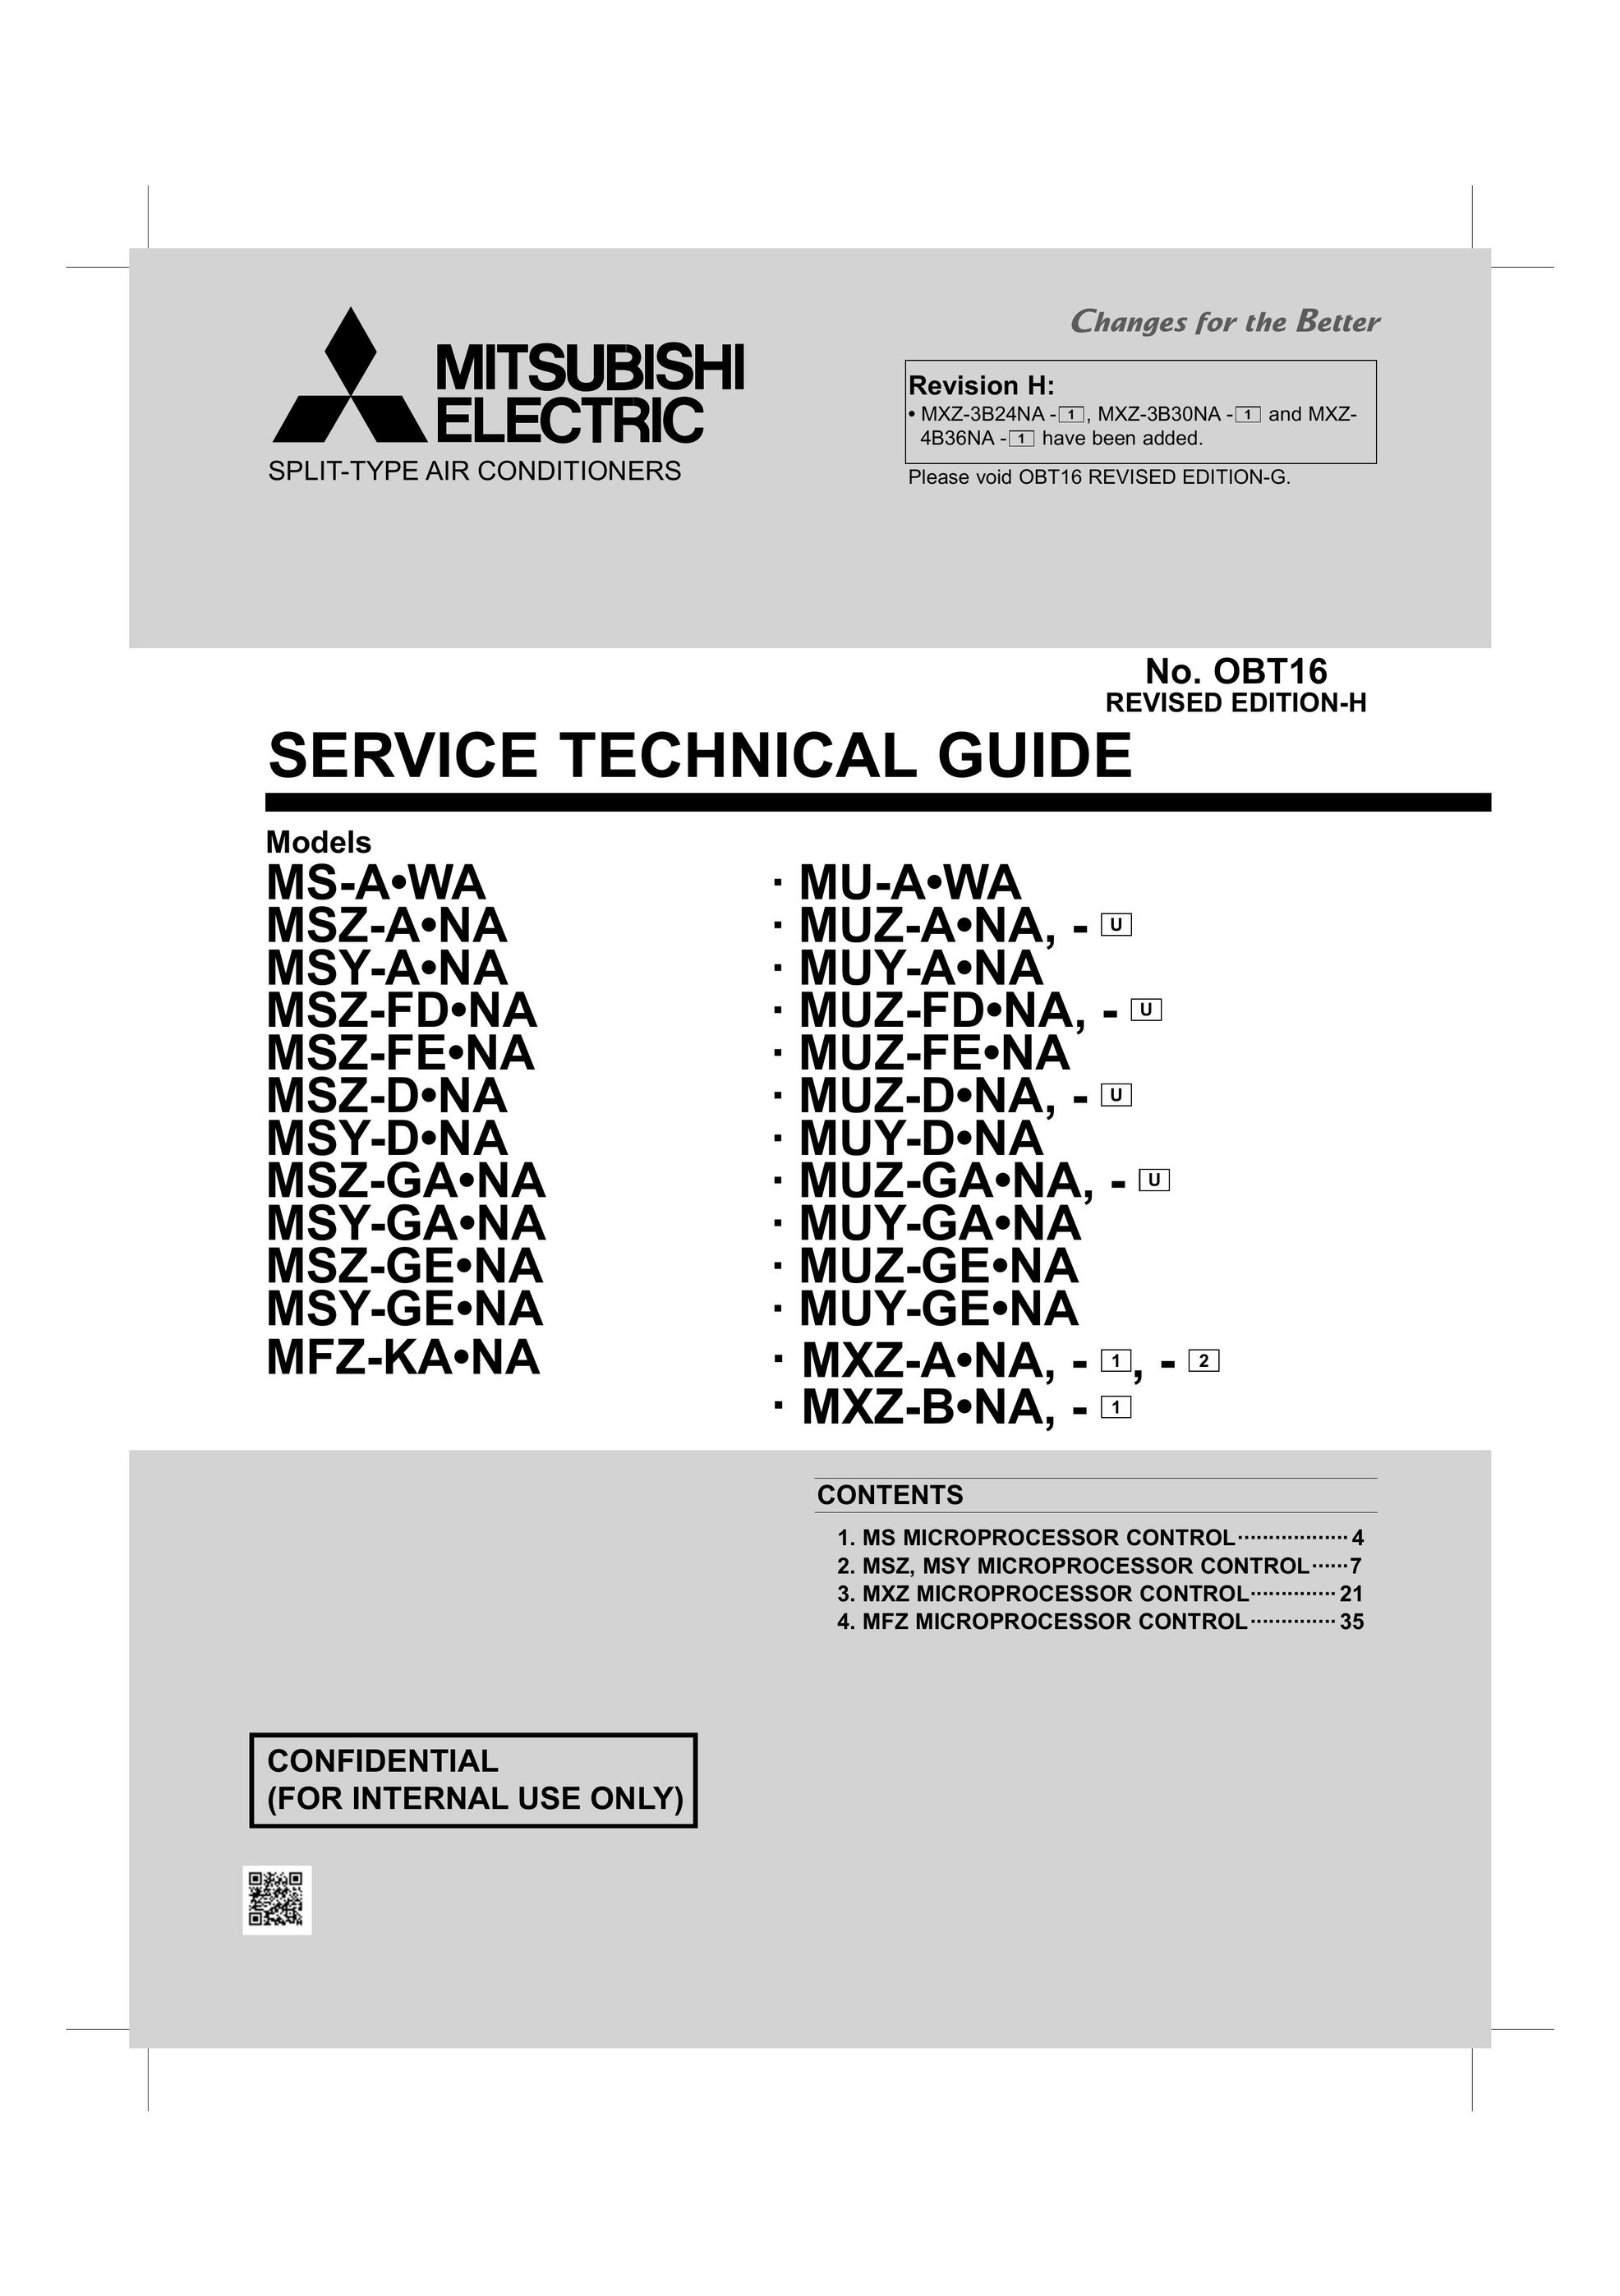 Mitsumi electronic MSY-ANA Air Conditioner User Manual